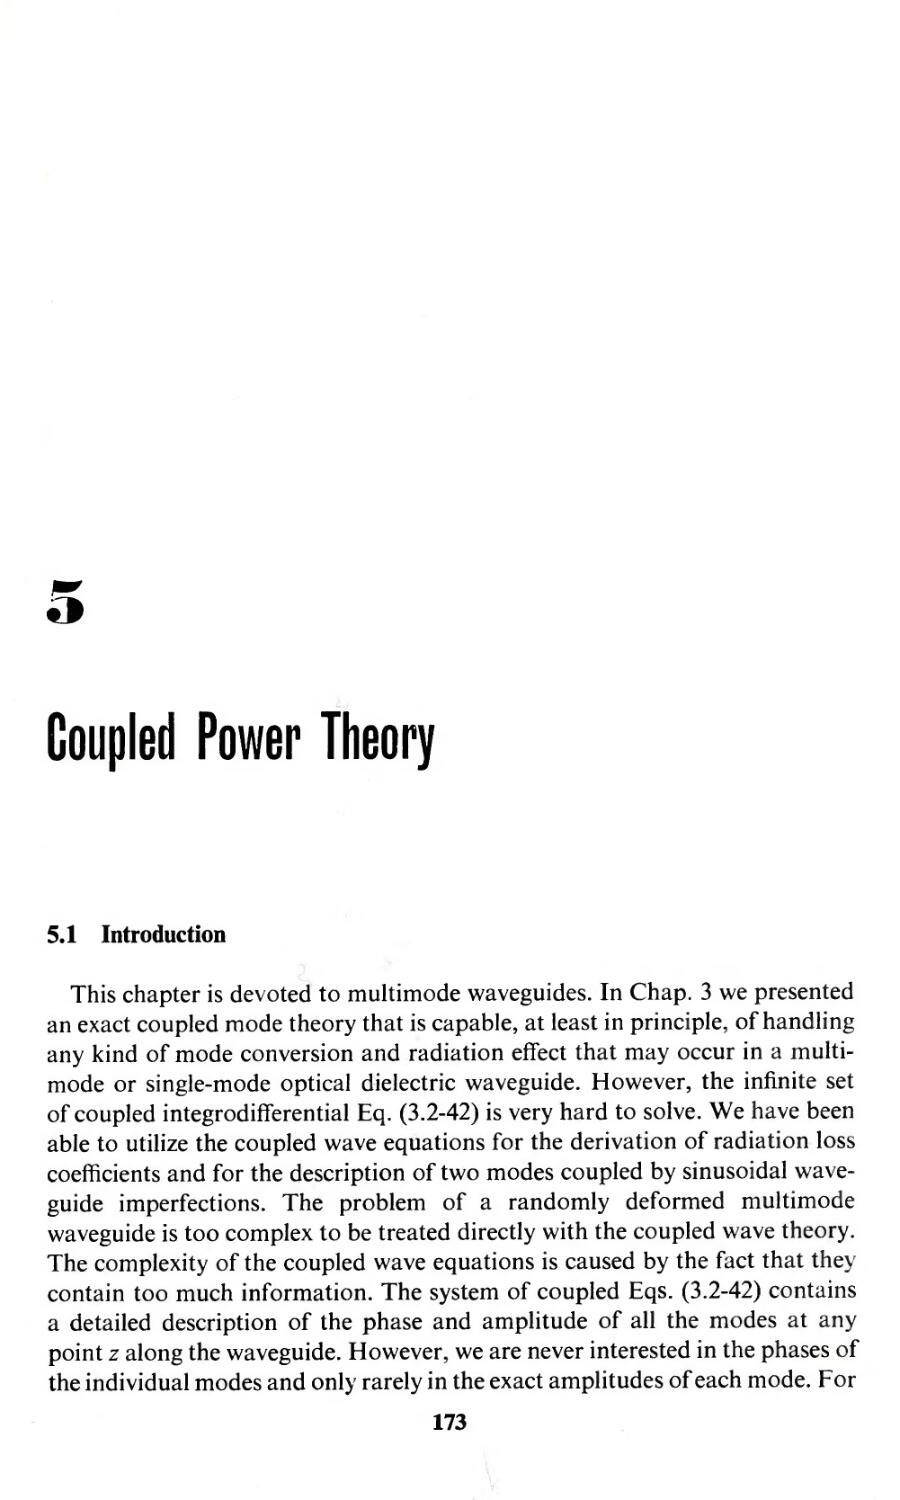 Chapter 5. Coupled Power Theory
Coupled power theory, 173